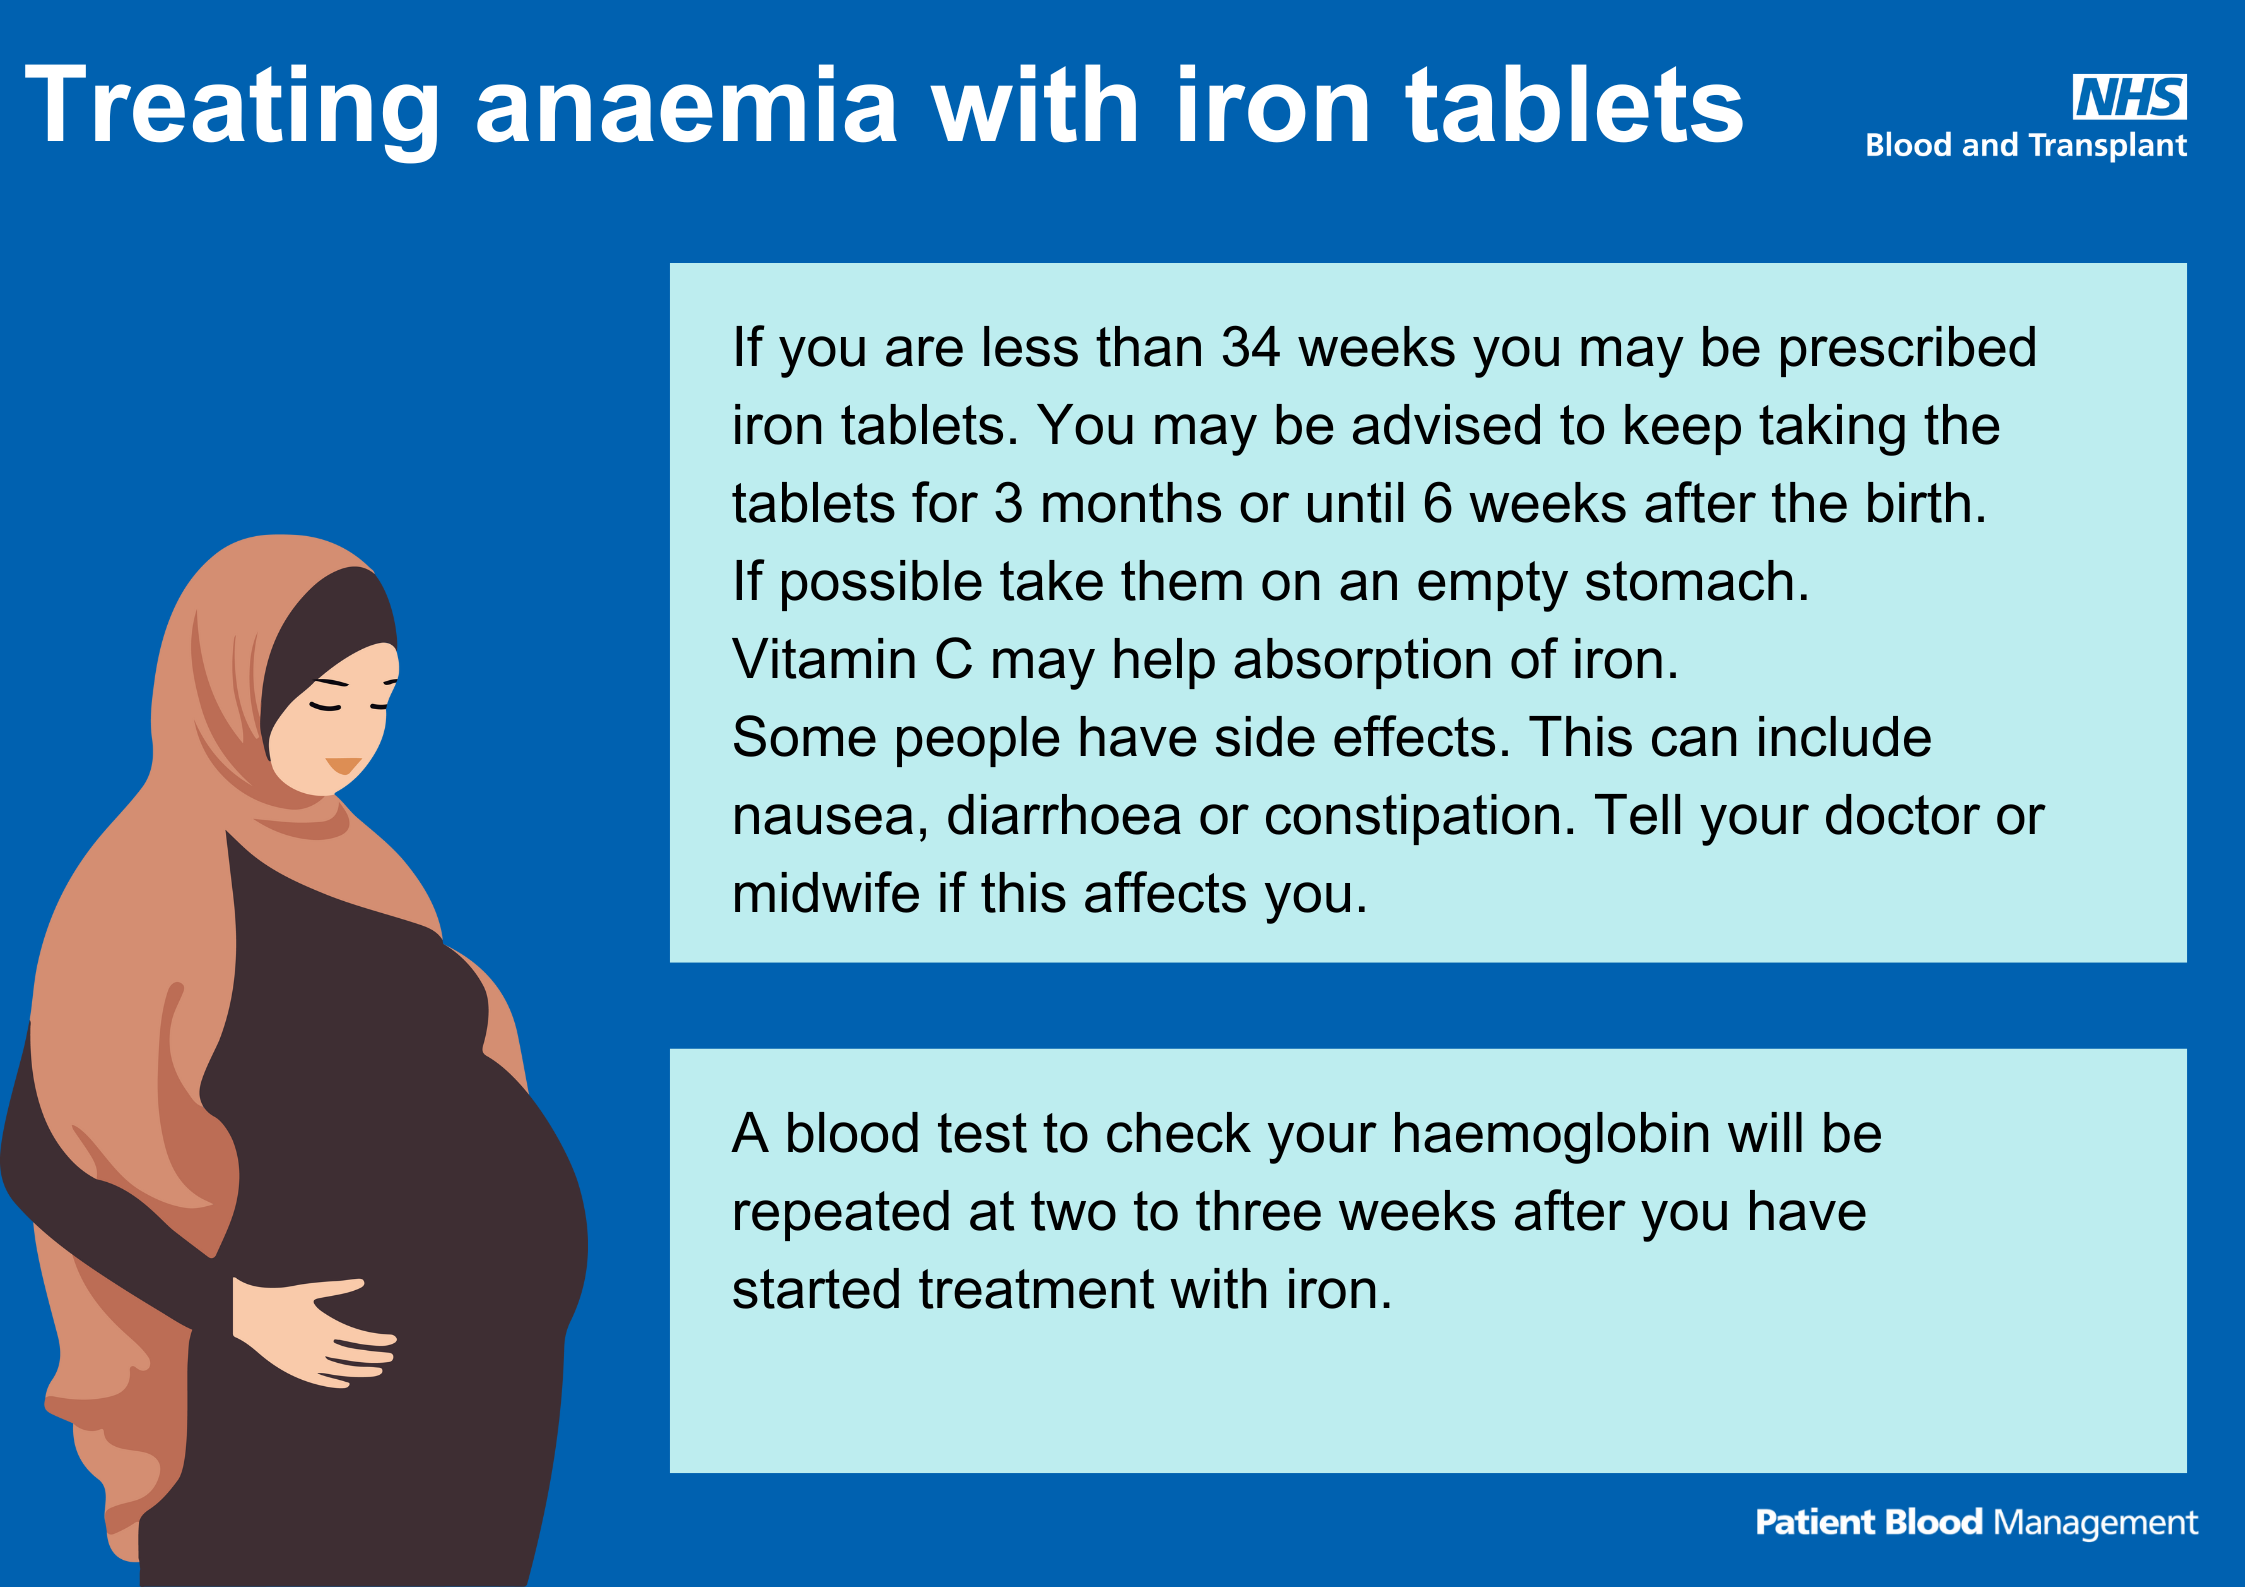 Treating anaemia with iron tablets infographic - scroll down for word version